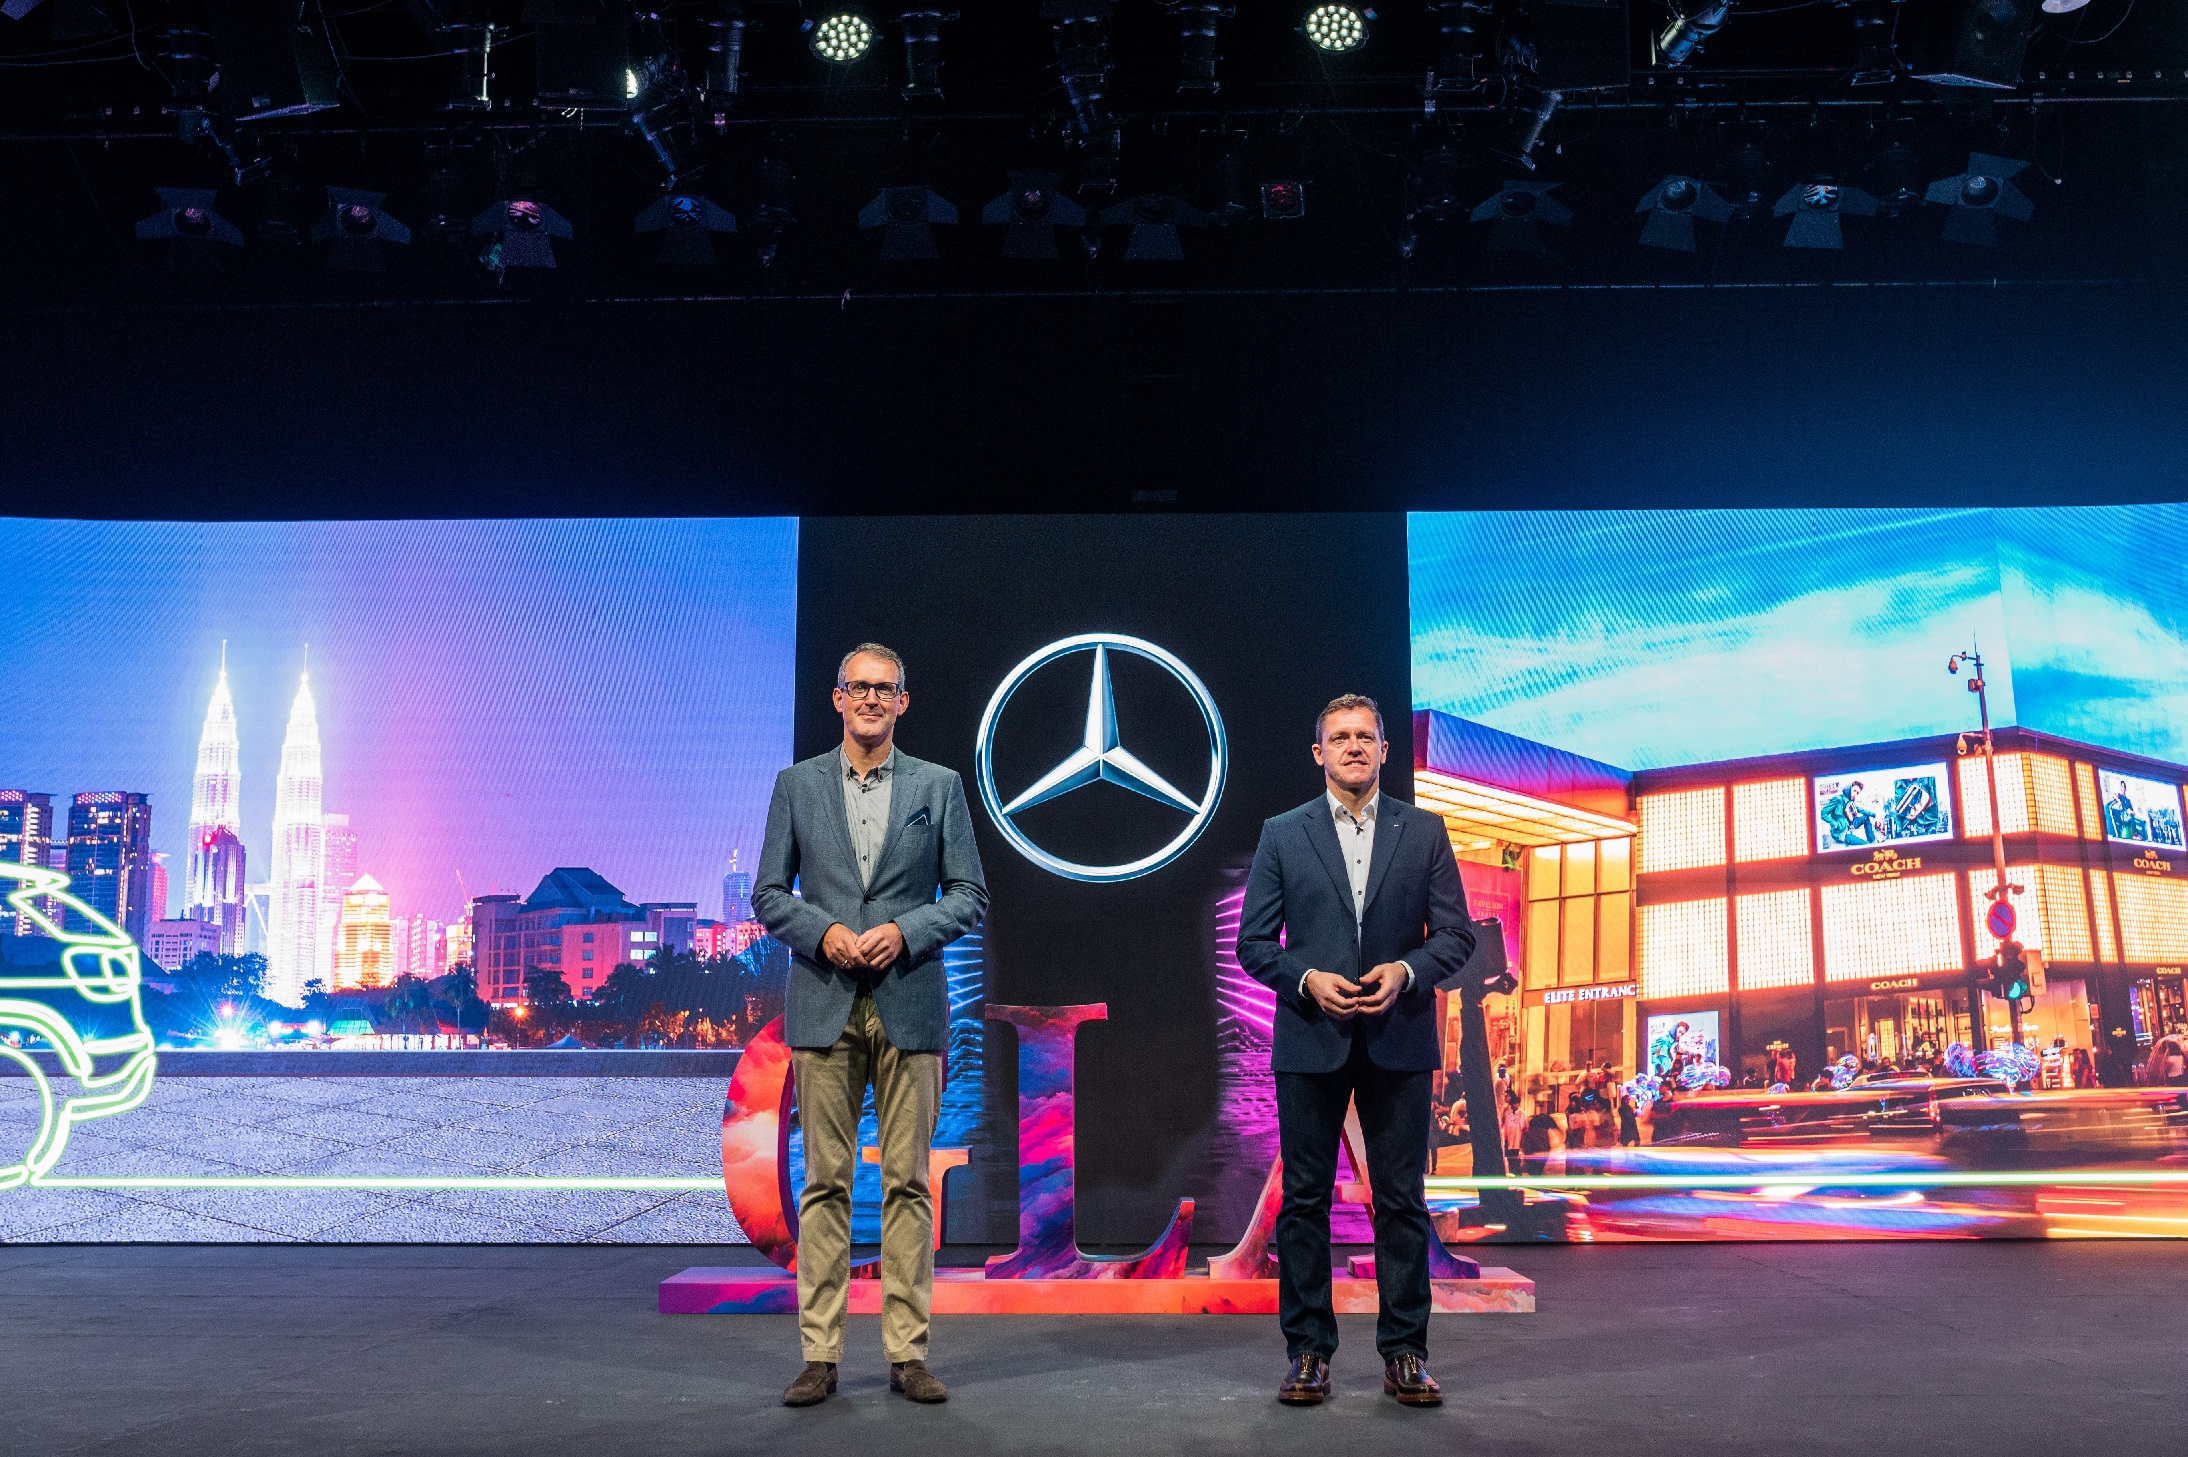 Claus Weidner, President & CEO of Mercedes-Benz Malaysia (left) and Michael Jopp, Vice President of Sales and Marketing at Mercedes-Benz Malaysia at the (digital) launch of the new Mercedes-Benz GLB SUV range last year